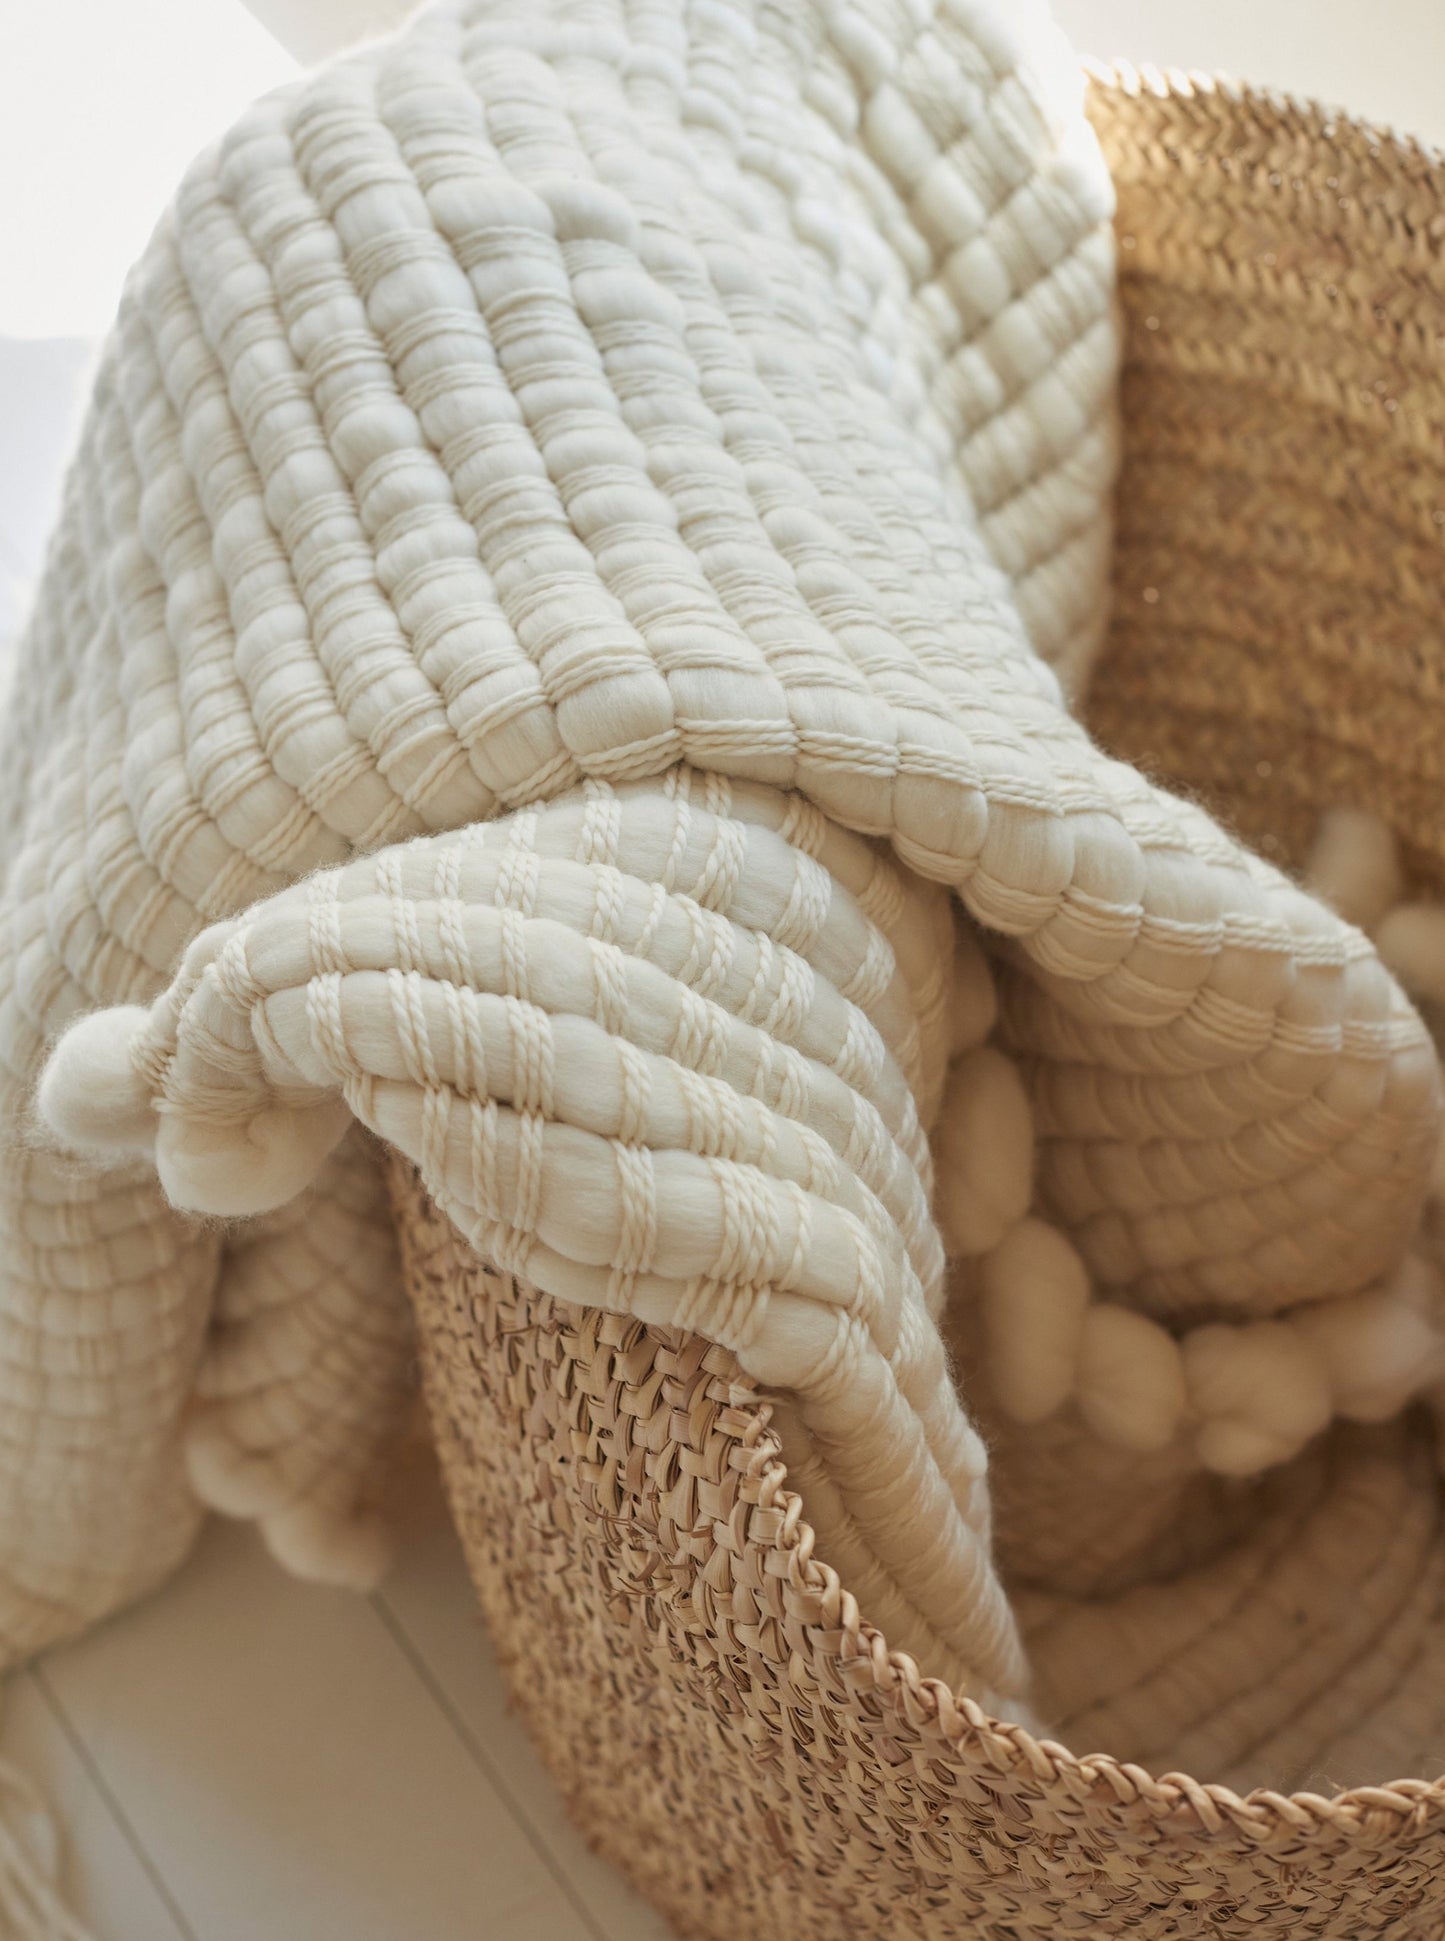 Super Chunky Weaving blanket throw in a basket